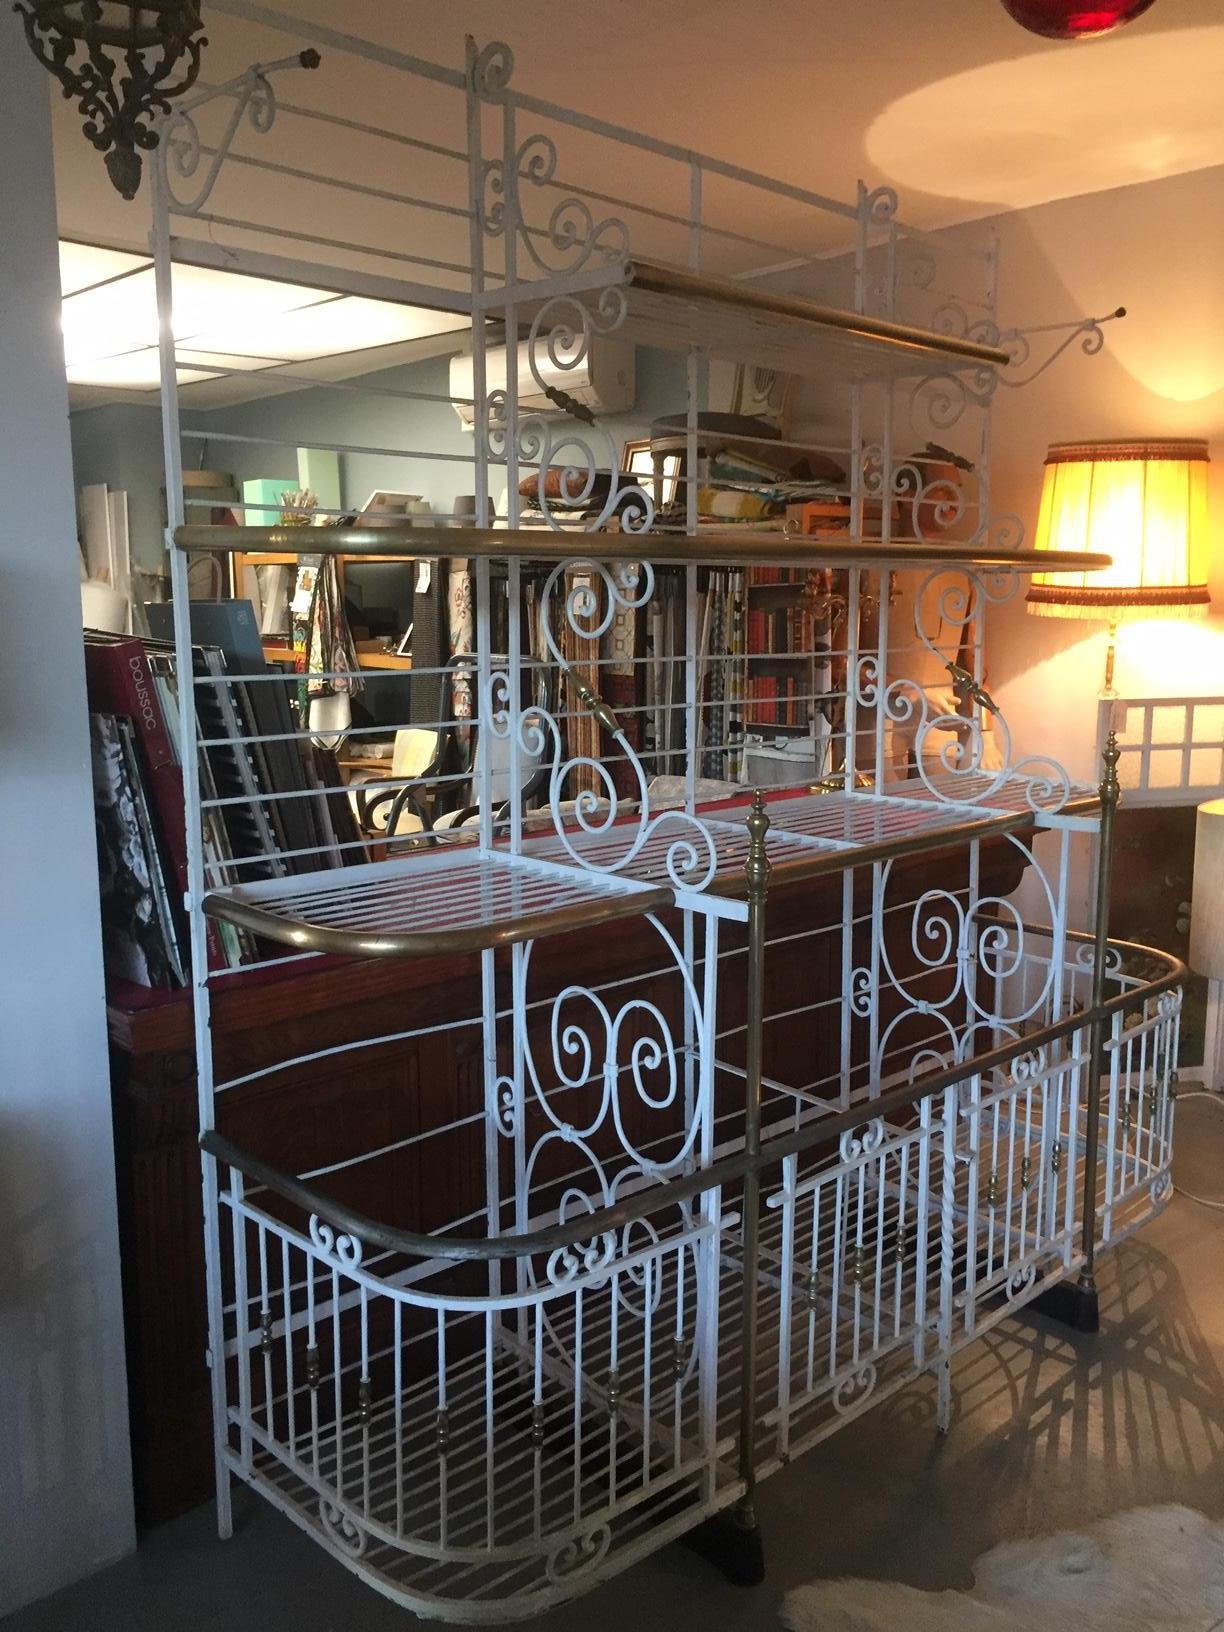 Beautiful 20th century French wrought iron and gilded brass baker's rack from the 1920s.
Used to present the bread. Very nice wrought iron. Exceptional quality. Not removable.